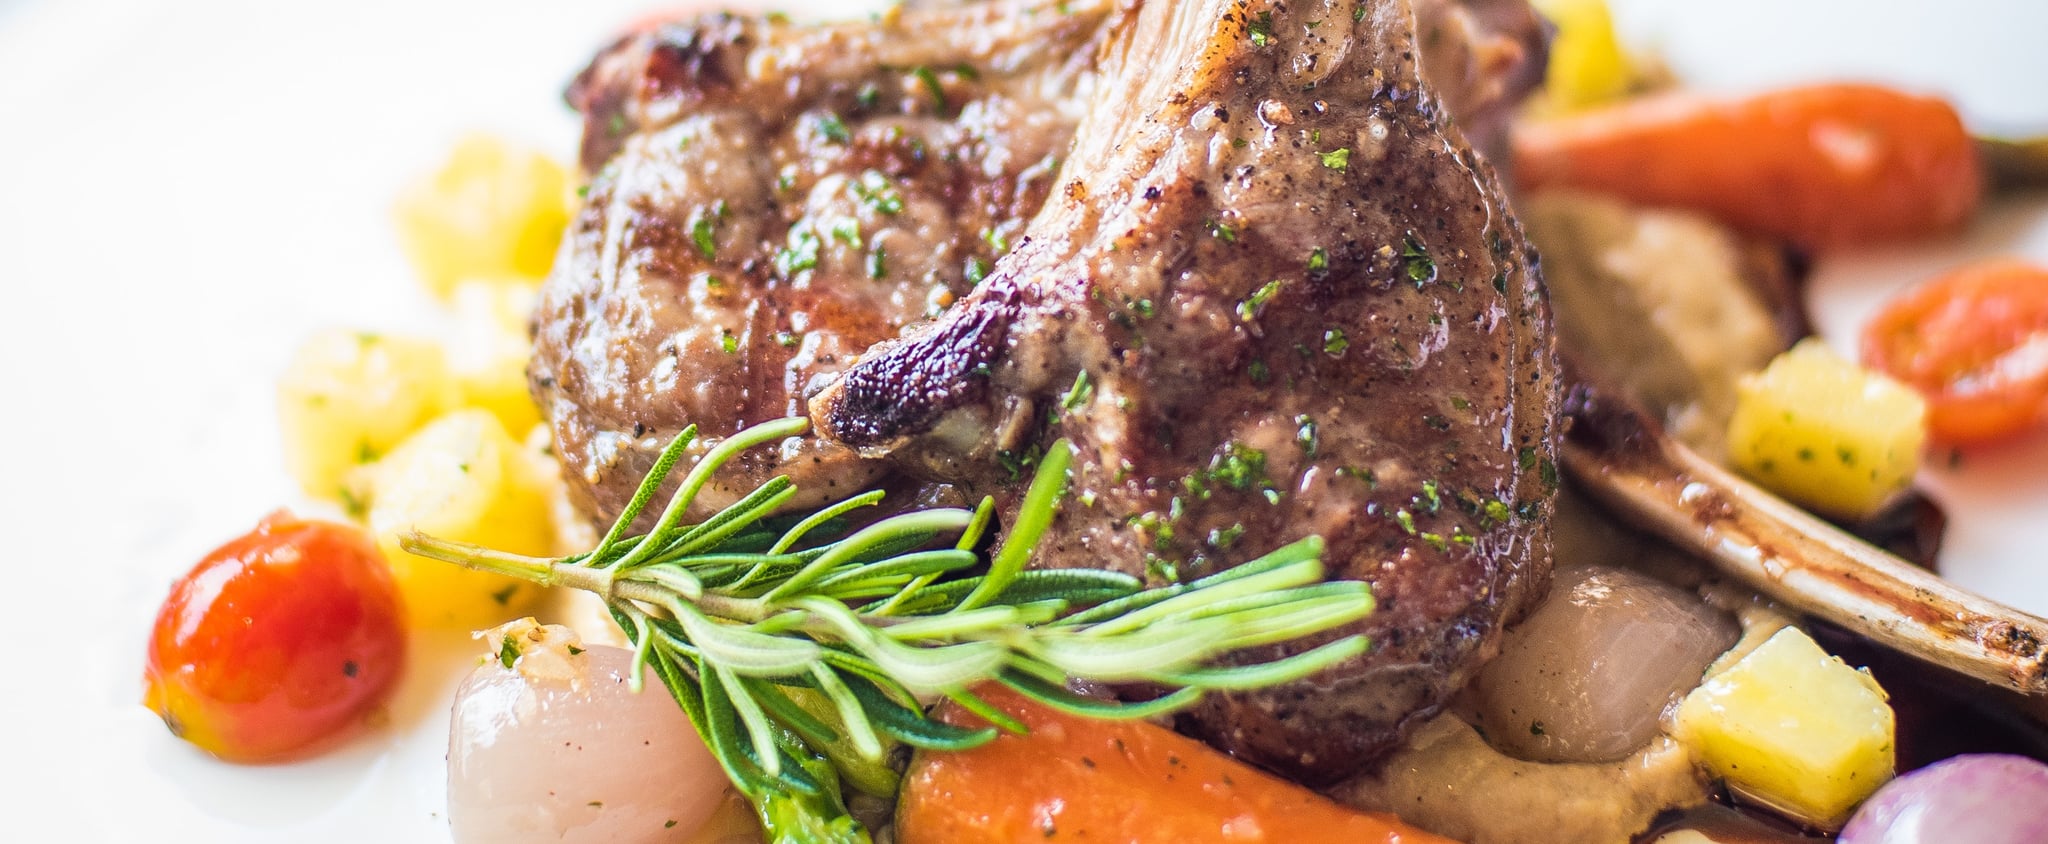 How To Cook Lamb Chops In The Oven Popsugar Food